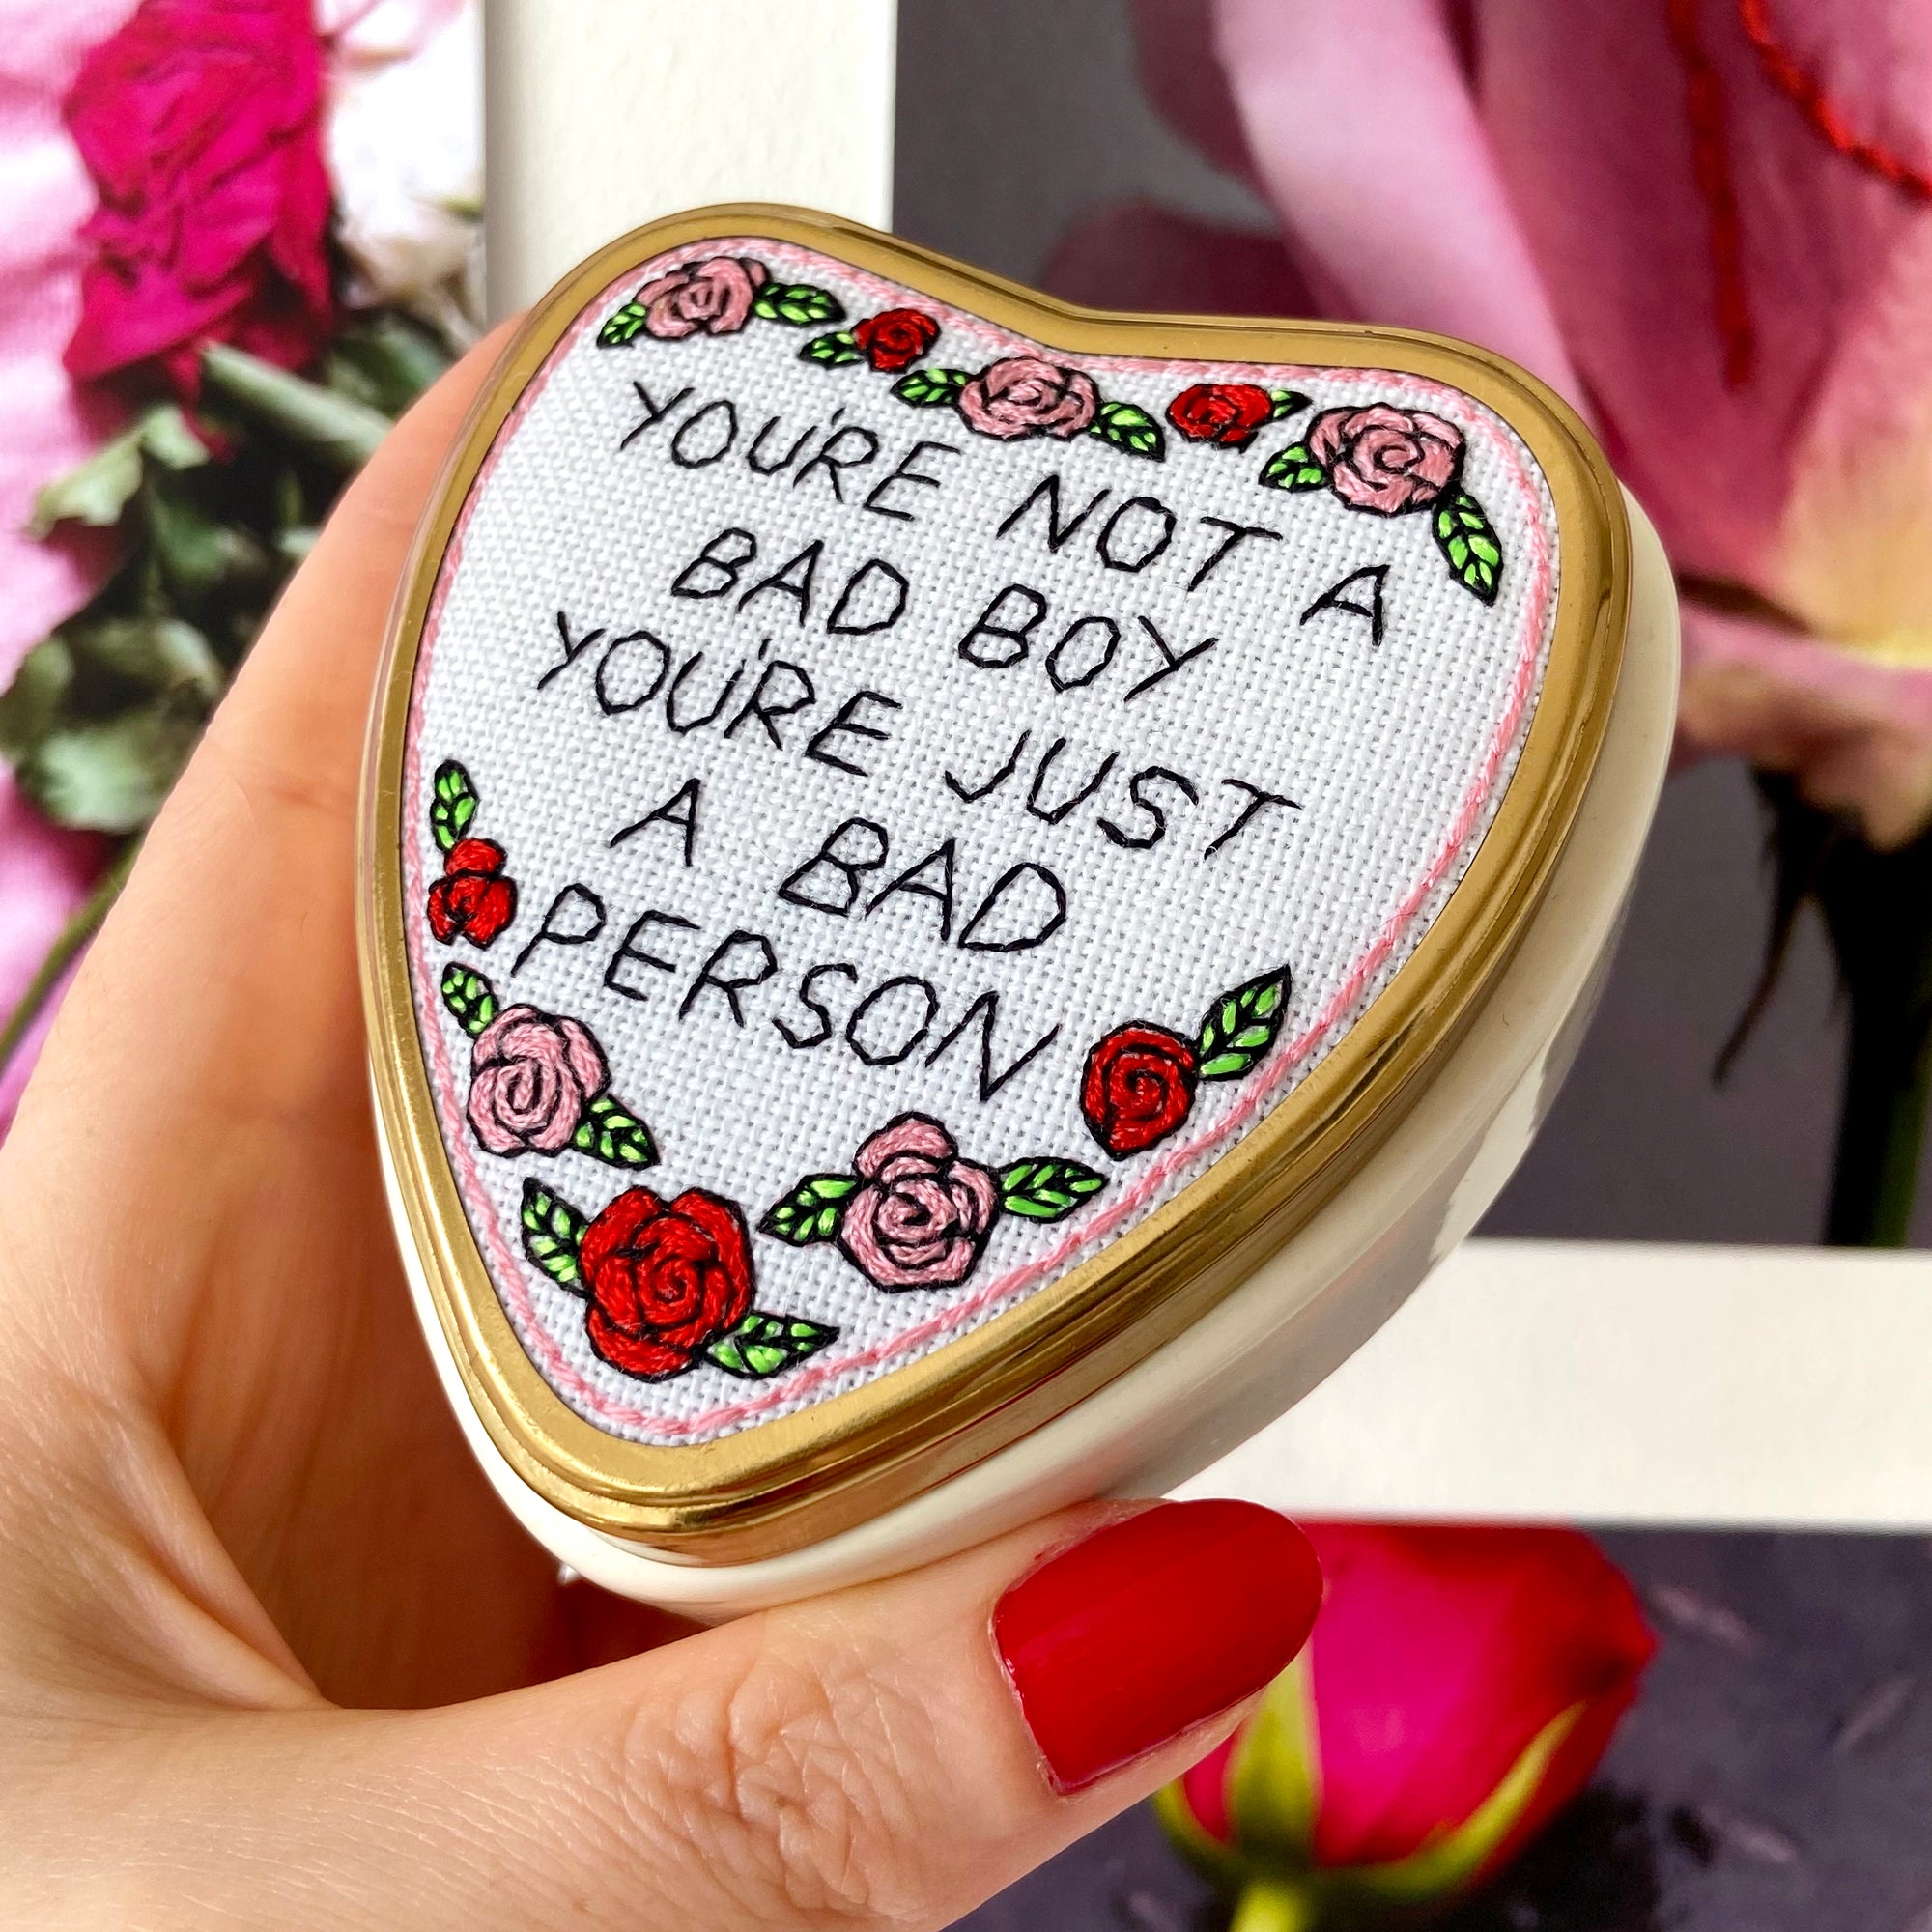 YOU'RE NOT A BAD BOY (ORIGINAL HAND EMBROIDERED TRINKET BOX)